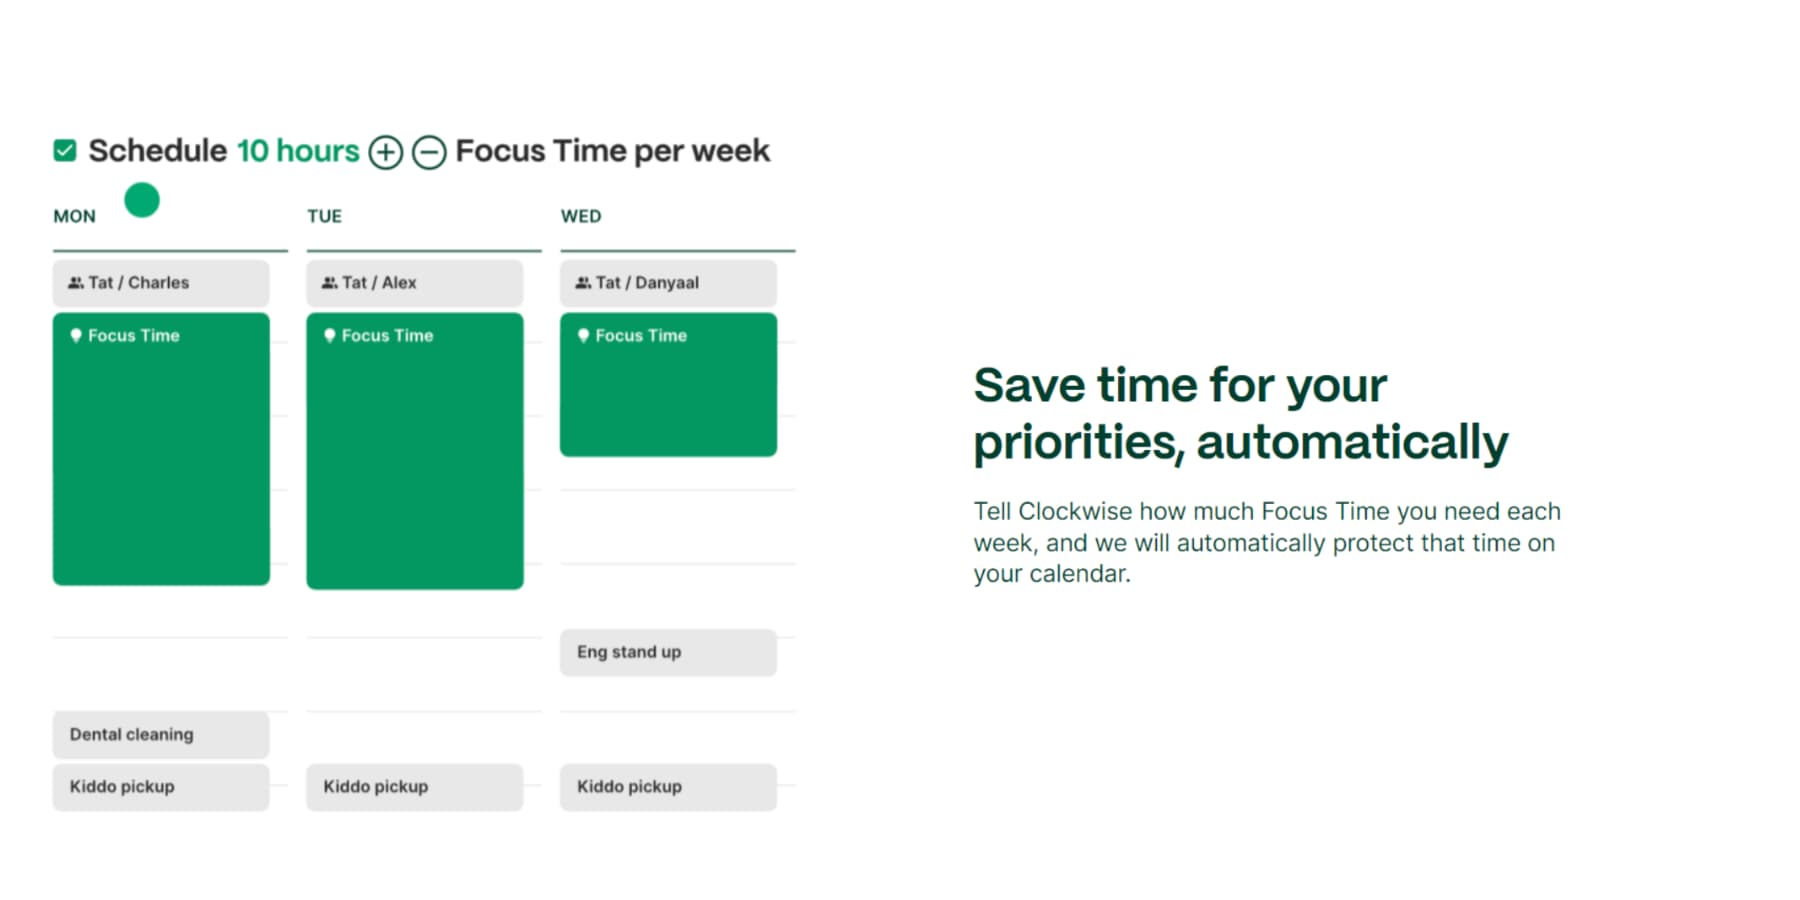 A screenshot of Clockwise's focus time scheduling feature from their website